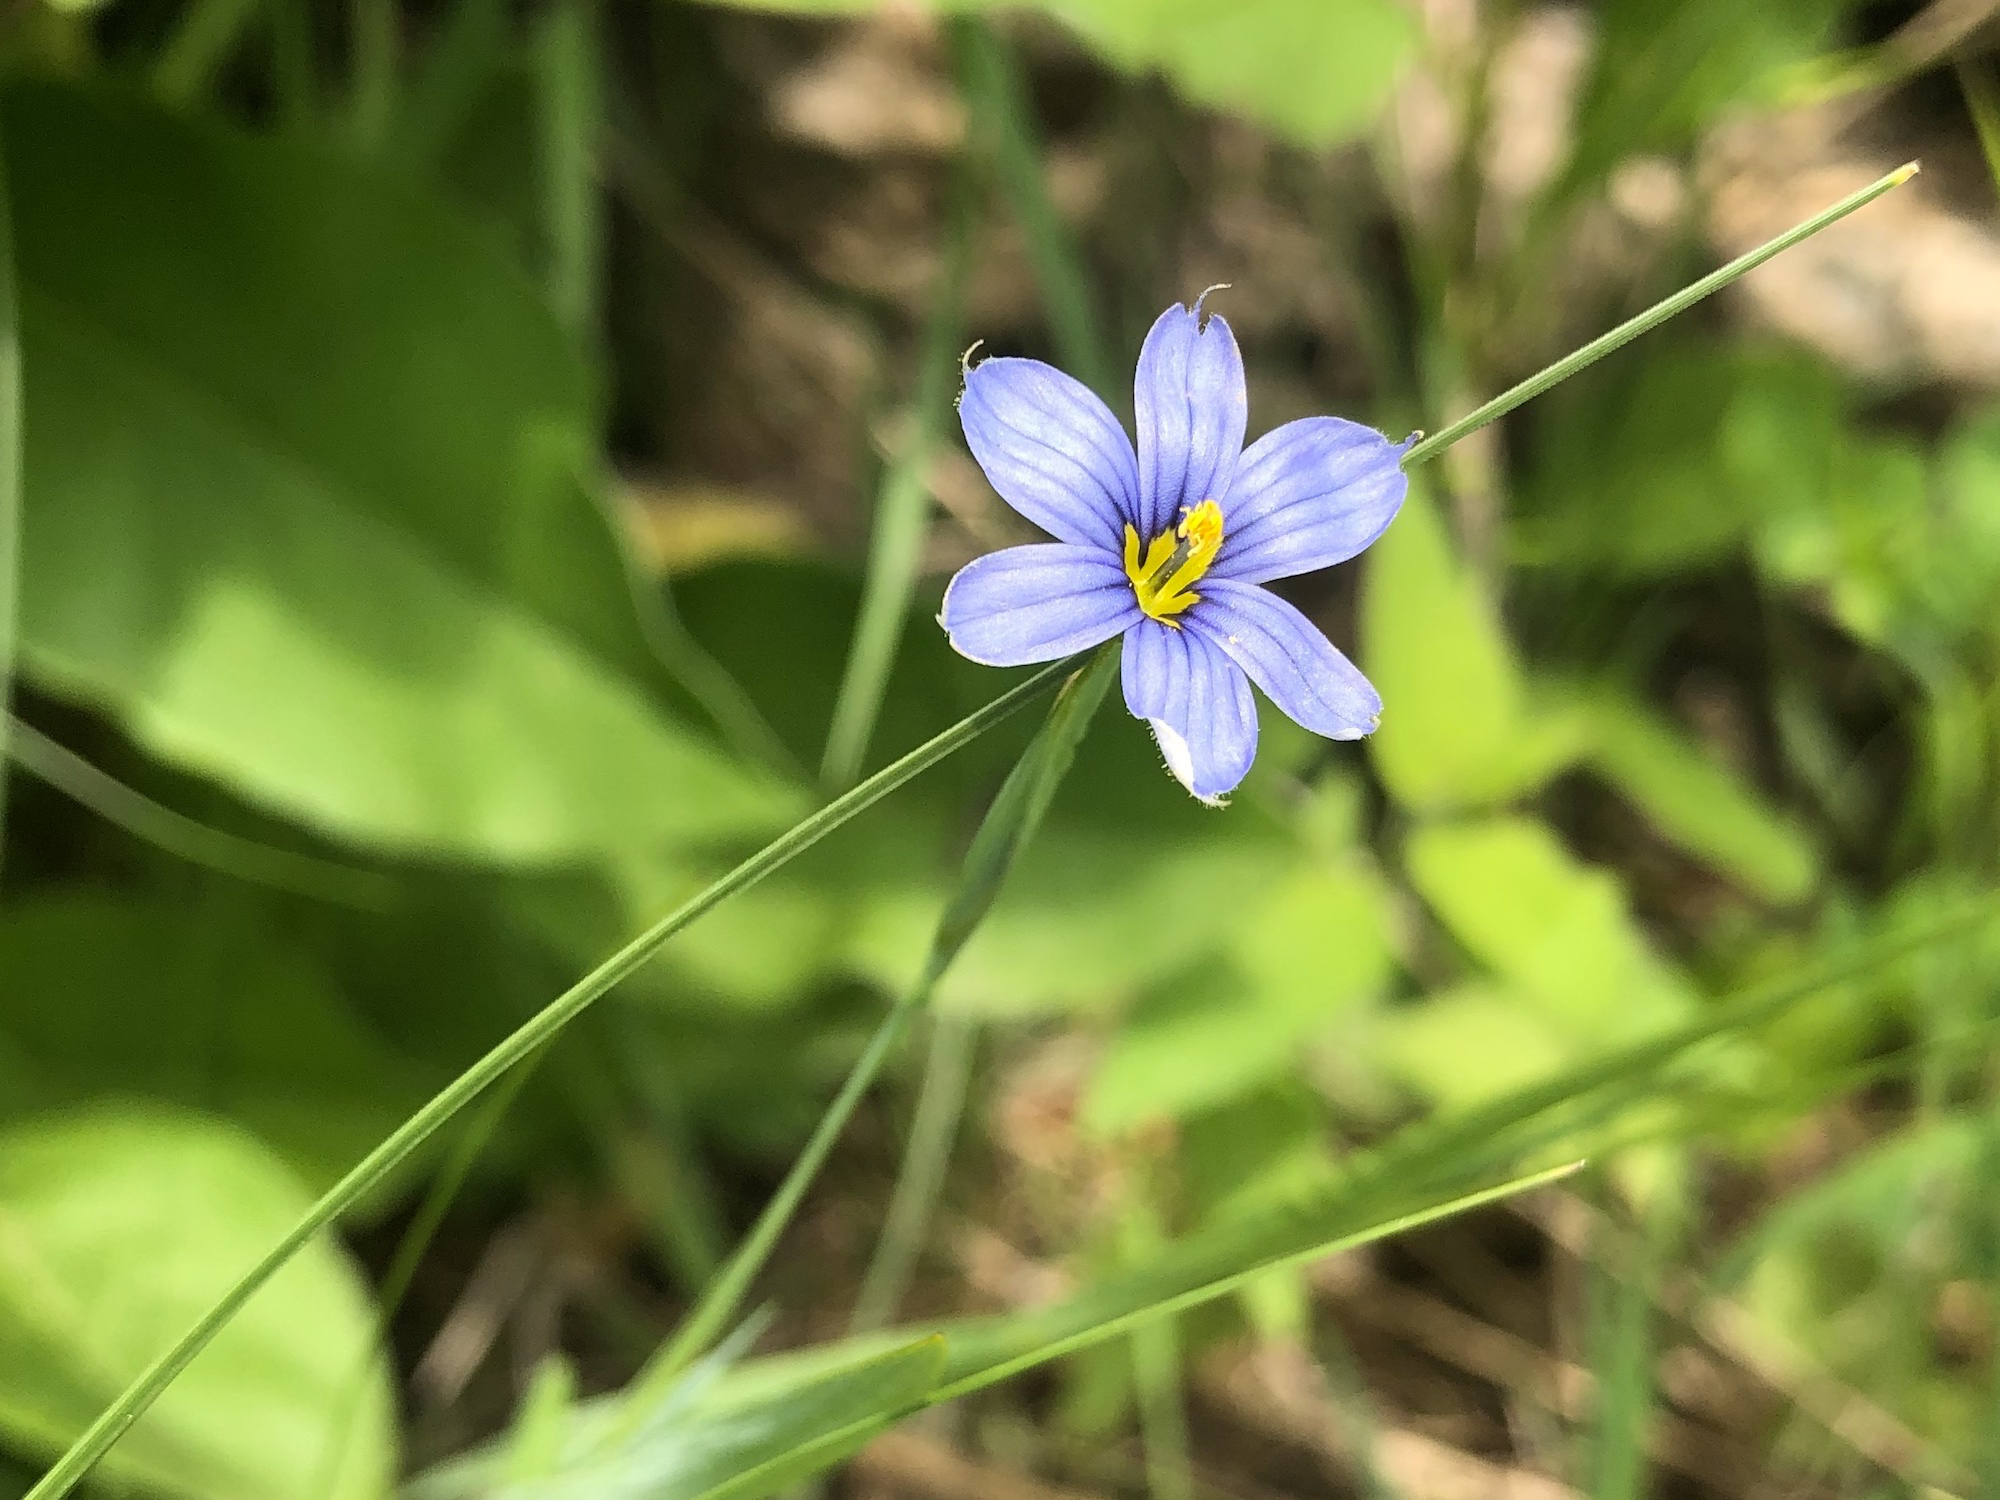 Blue-eyed Grass by UW Arbortetum Visitors Center in Madison, Wisconsin on May 25, 2021.